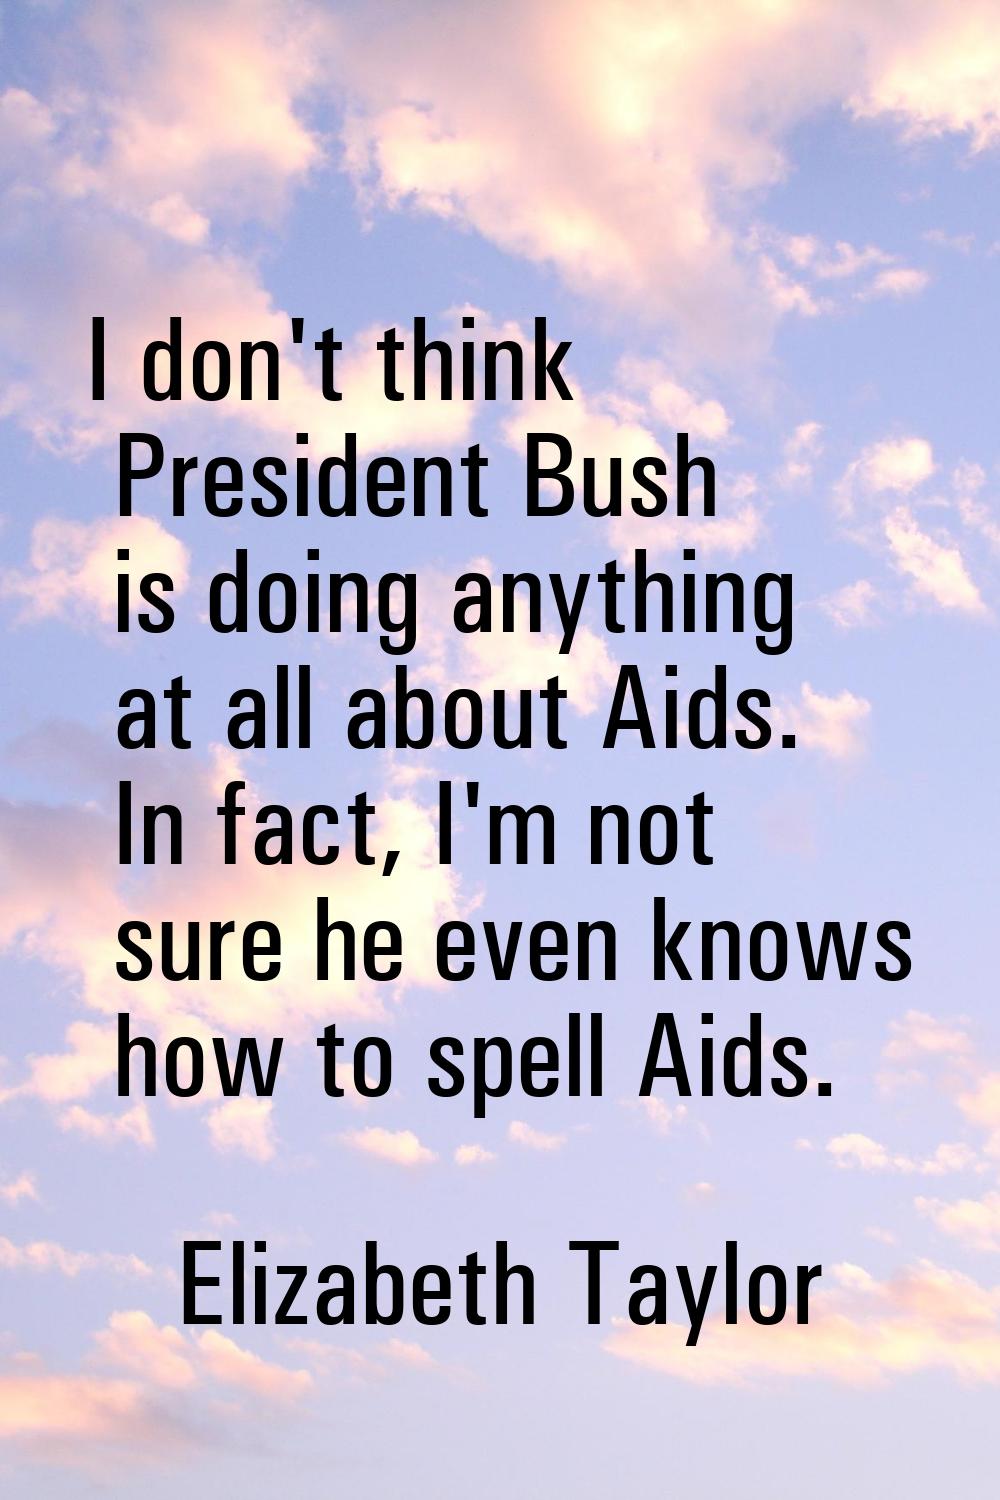 I don't think President Bush is doing anything at all about Aids. In fact, I'm not sure he even kno